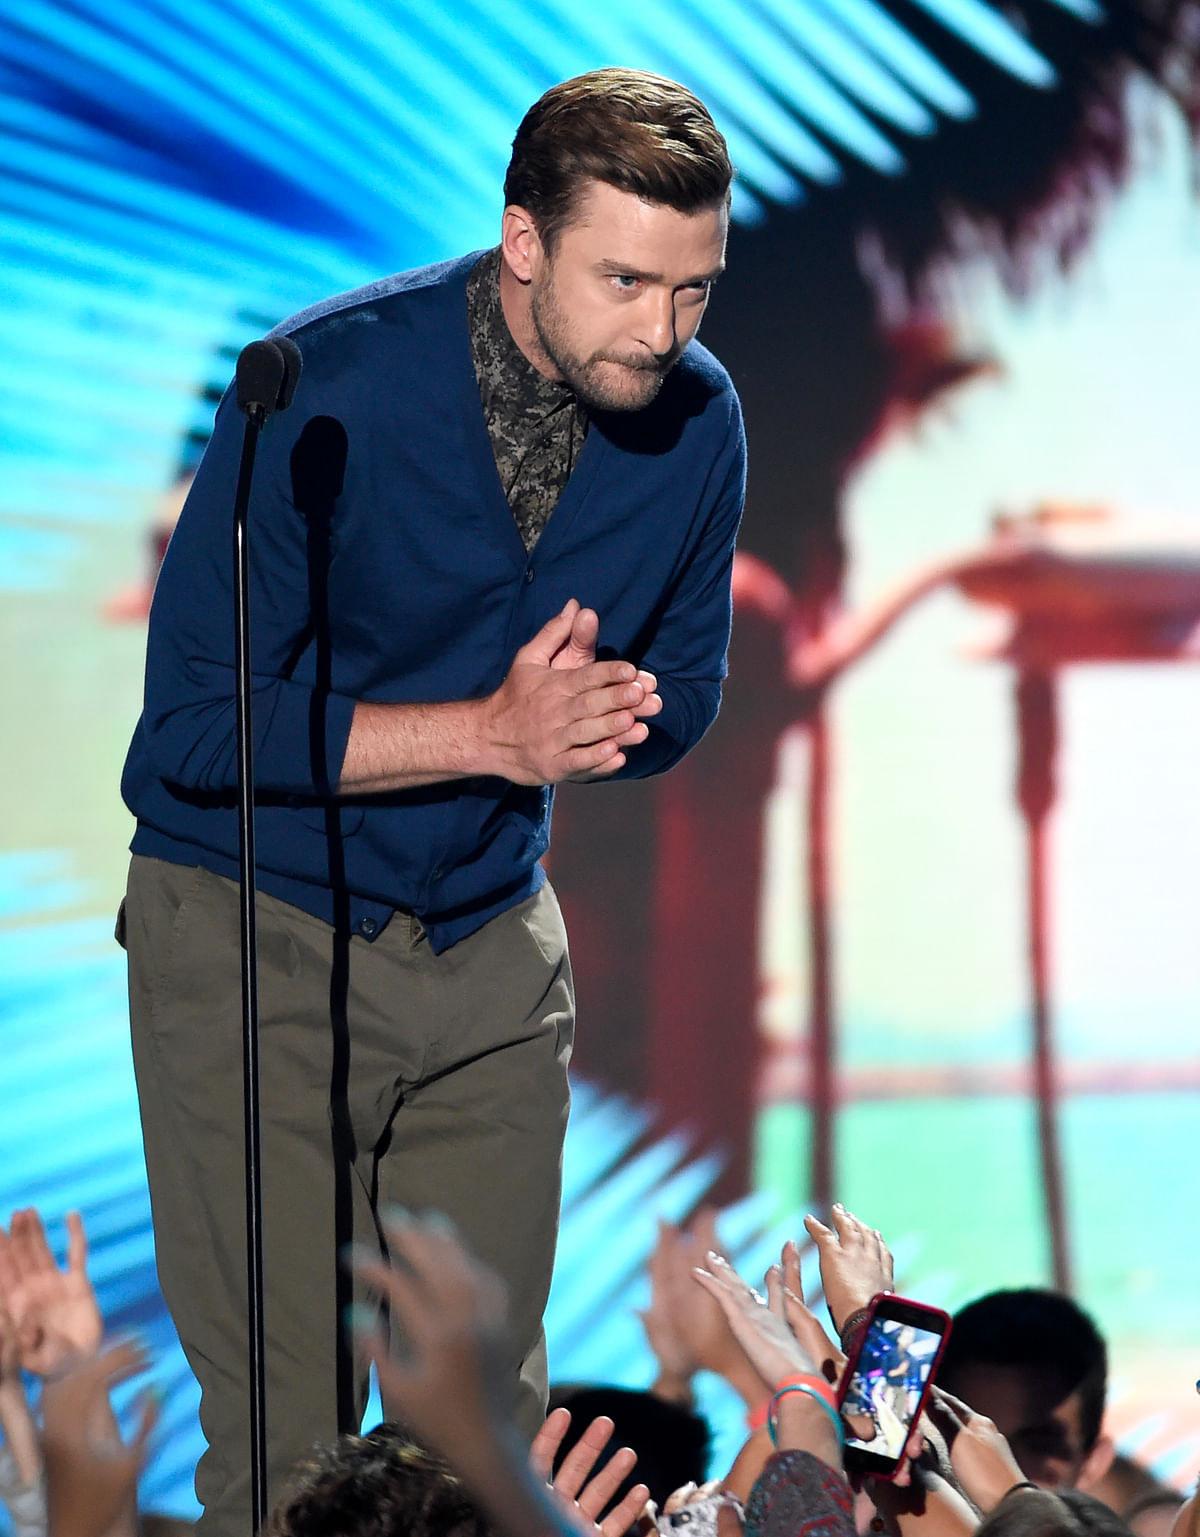 The Teen Choice Awards 2016 saw Justin Timberlake and Jessica Alba addressing violence and tolerance in the US.